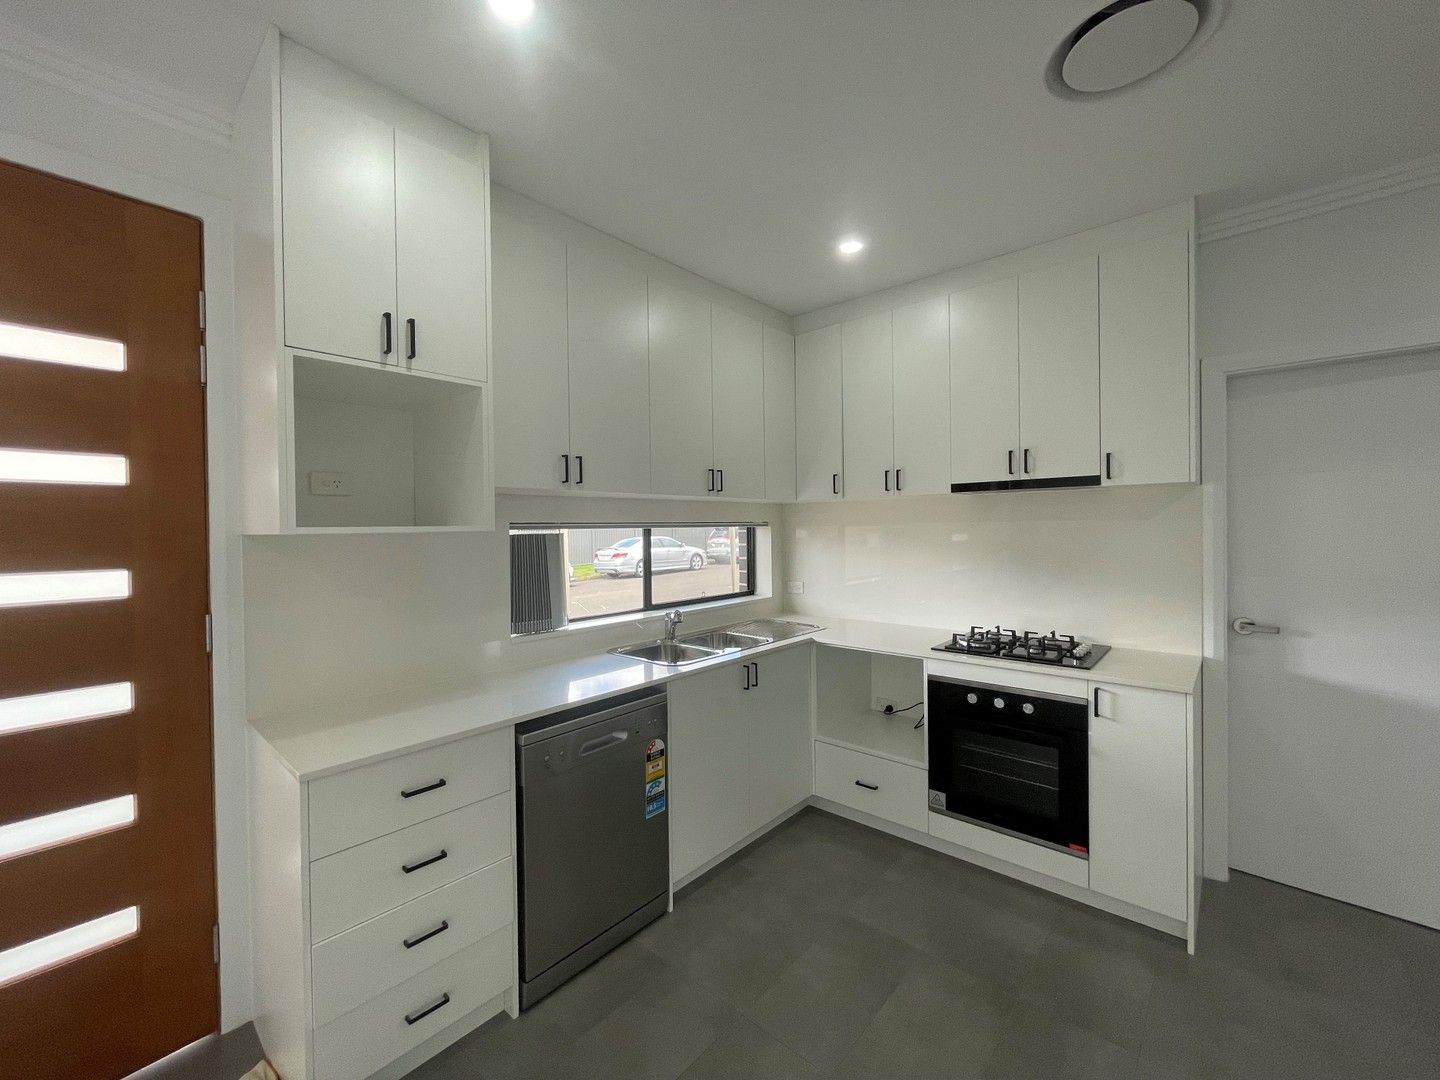 2 bedrooms House in 18a Curtin Street CABRAMATTA NSW, 2166